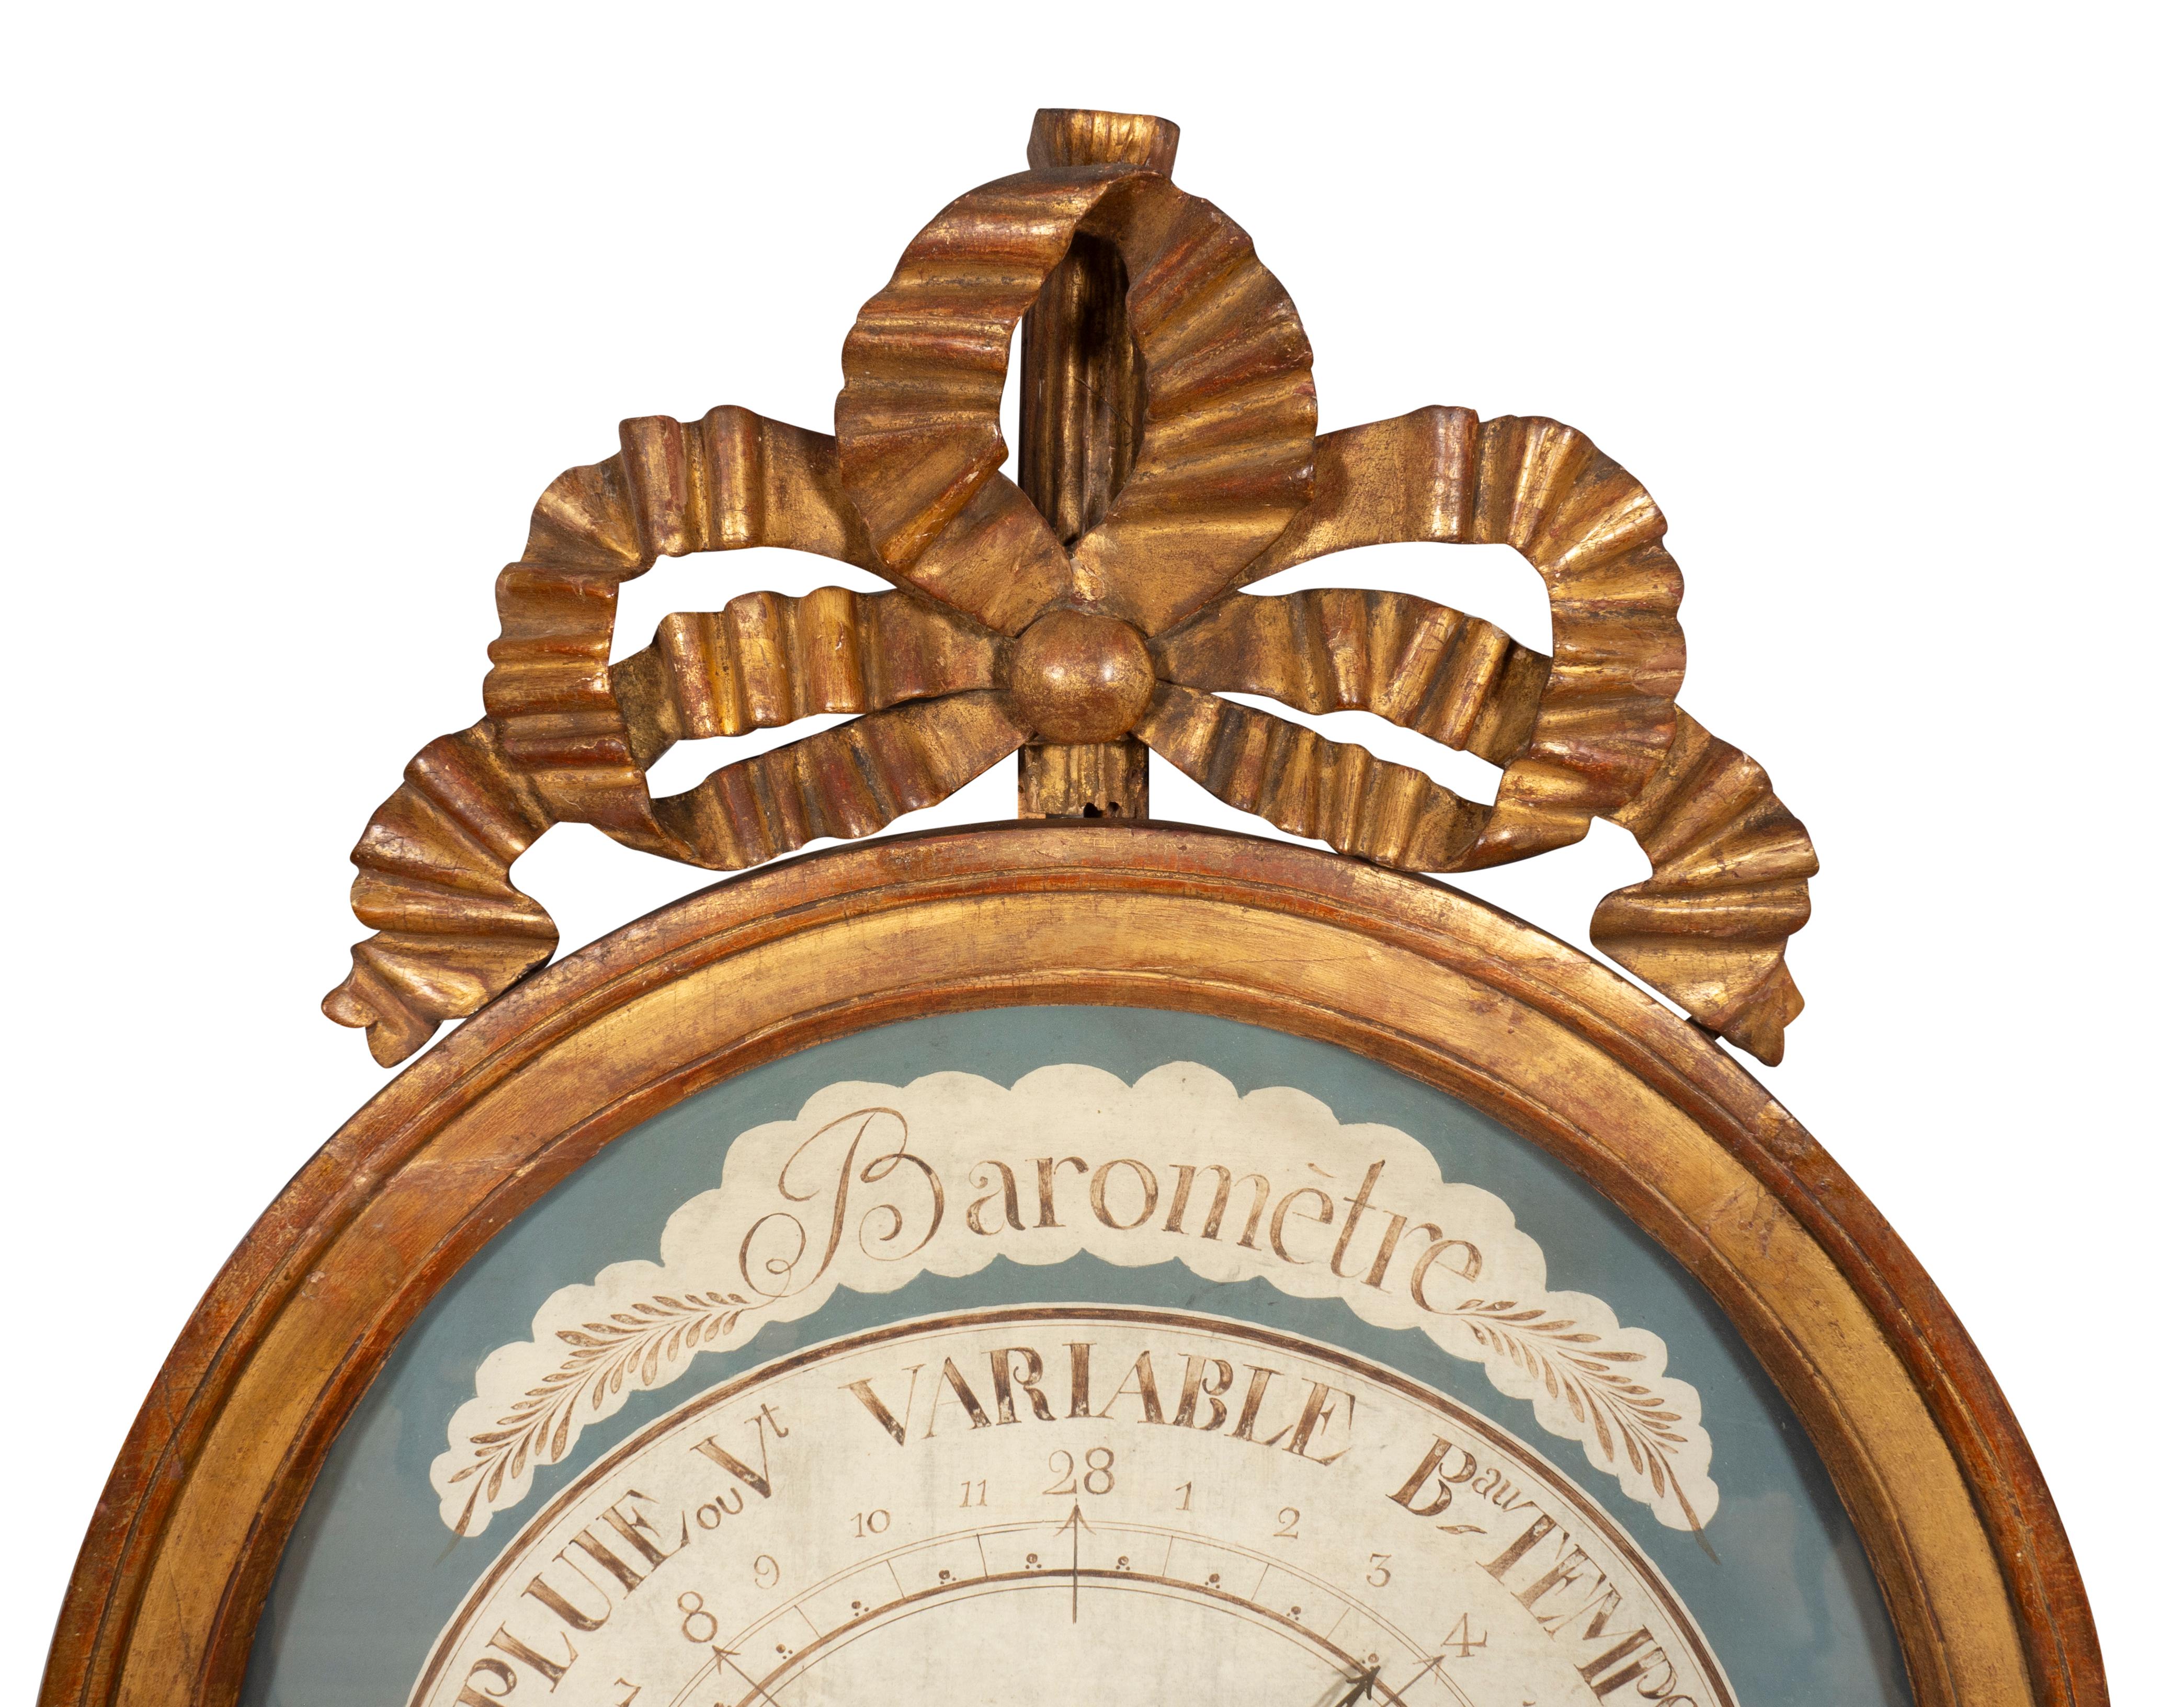 Oval with a ribbon bow over an oval glass fronted barometer with grisaille painted panel with metal directionals. Inscribed Selon Torricelli.